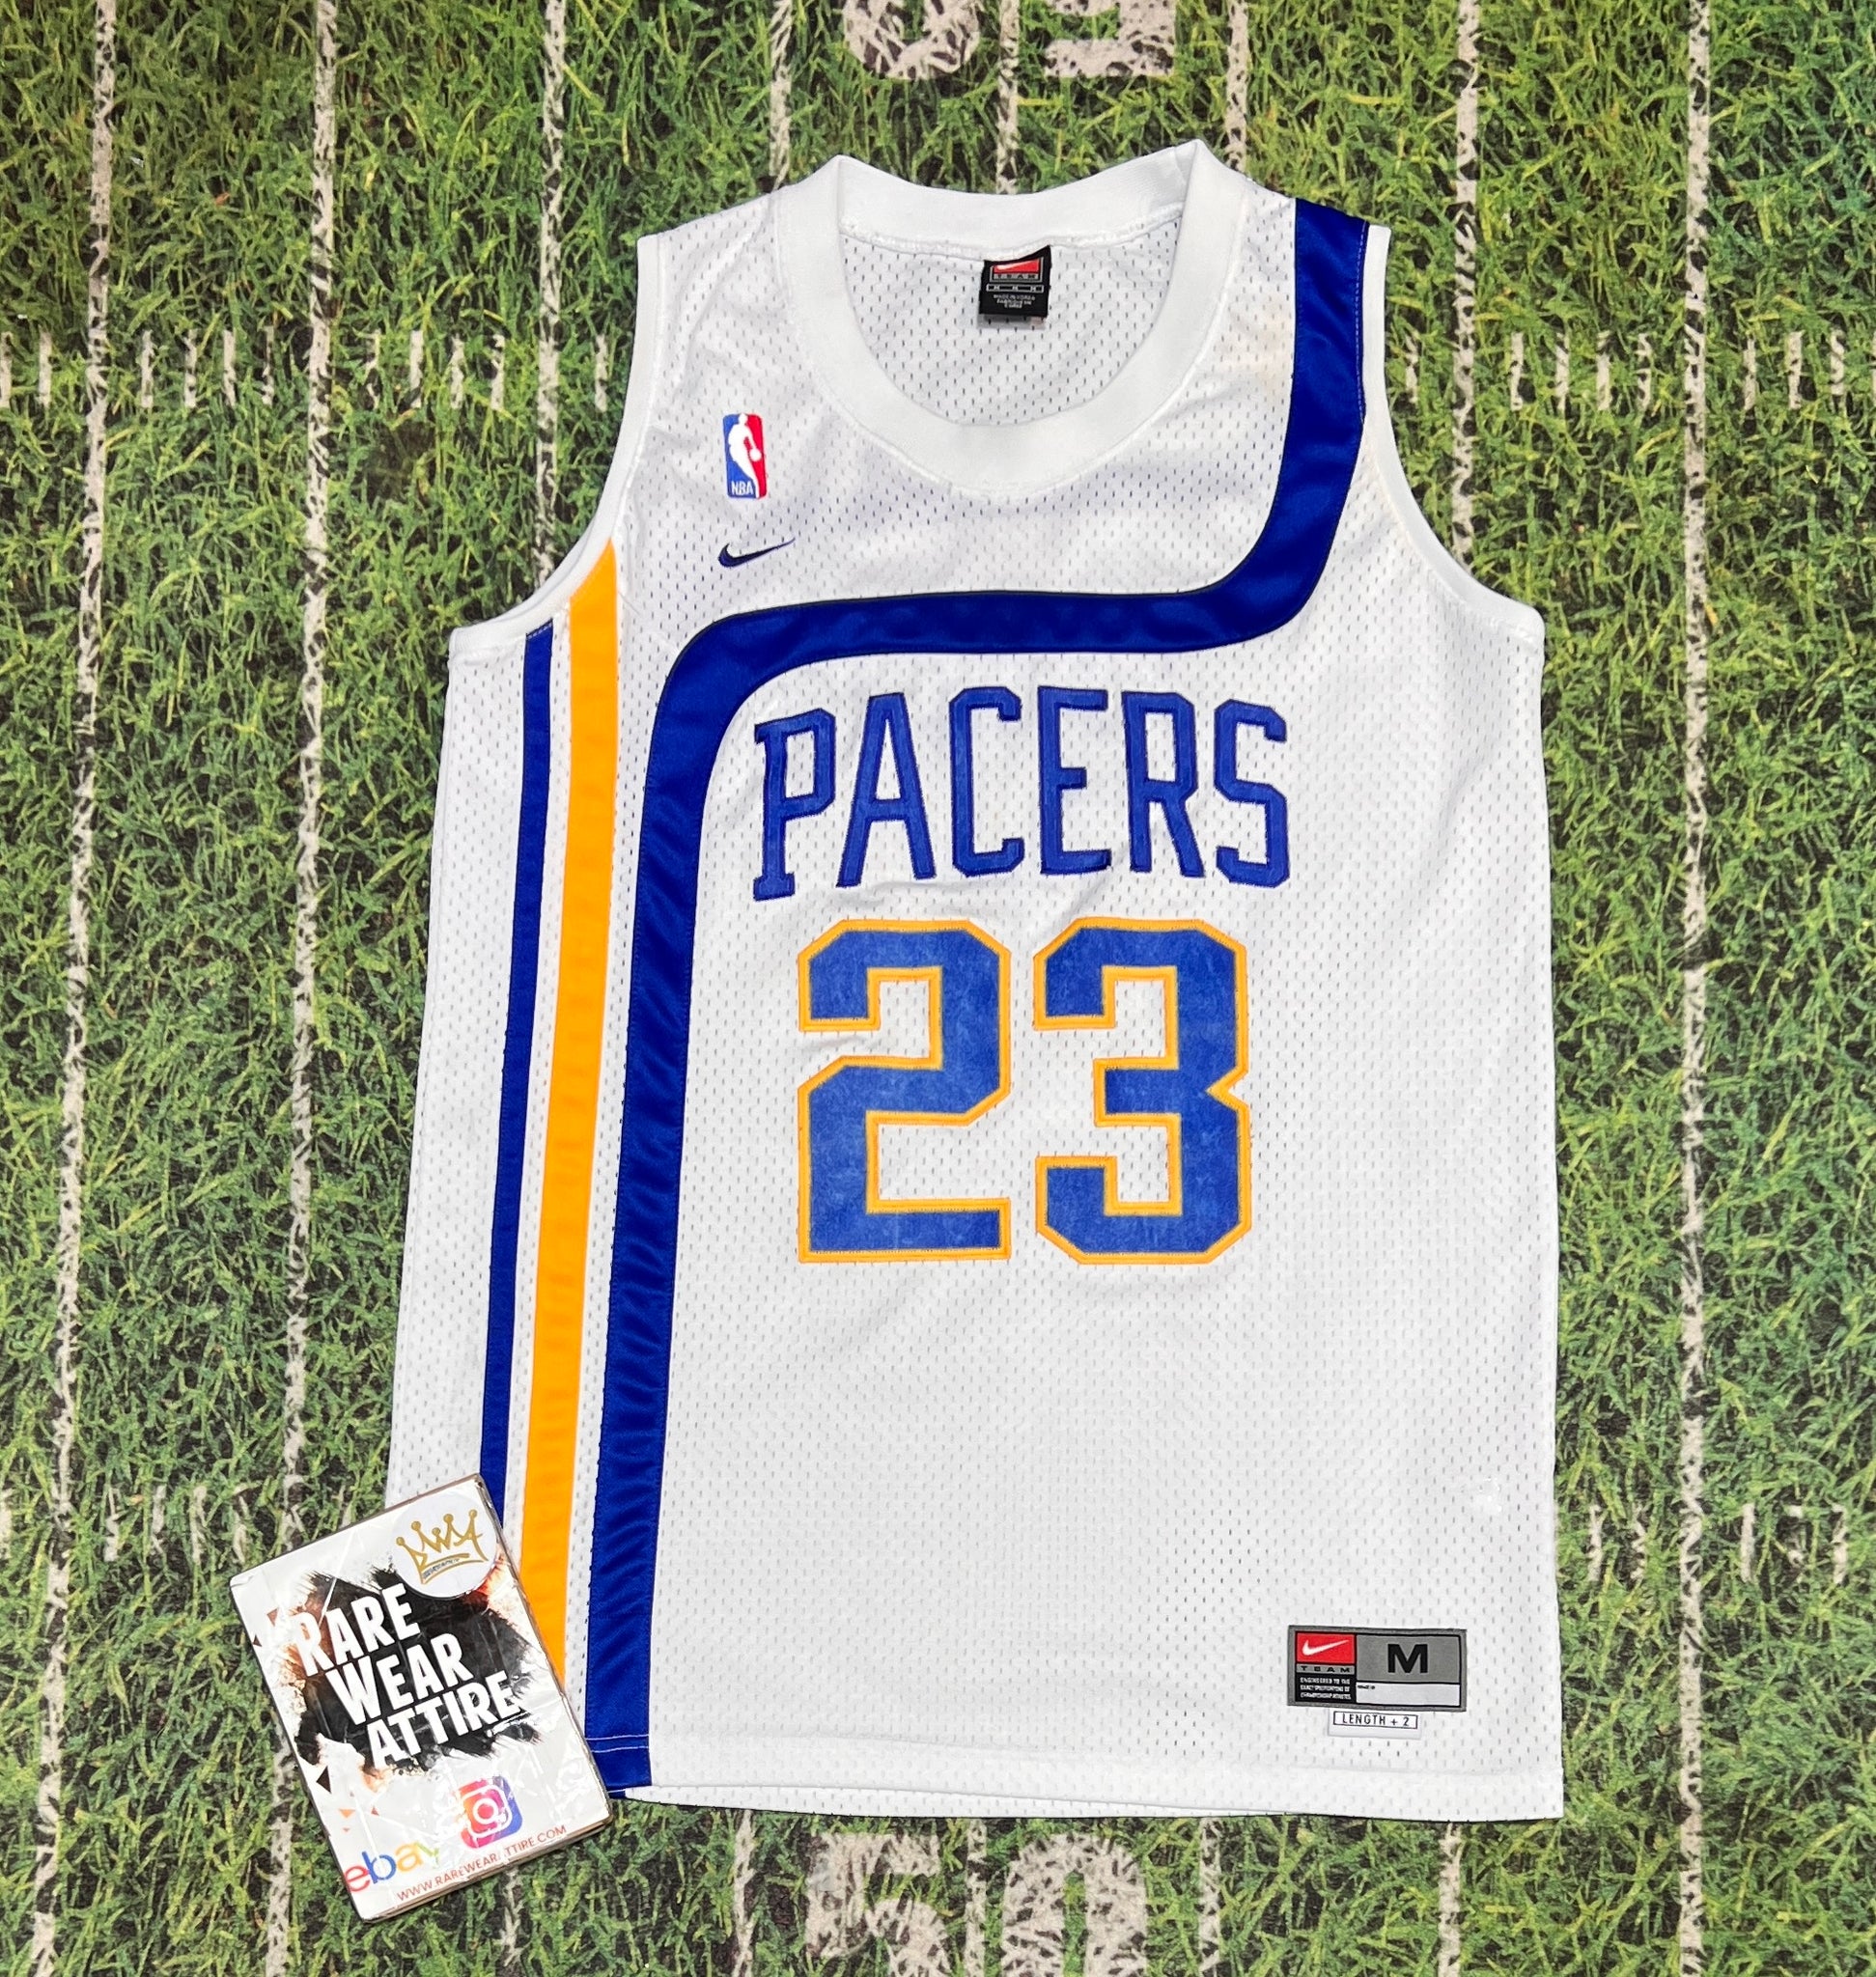 Pacers Nba Jersey 